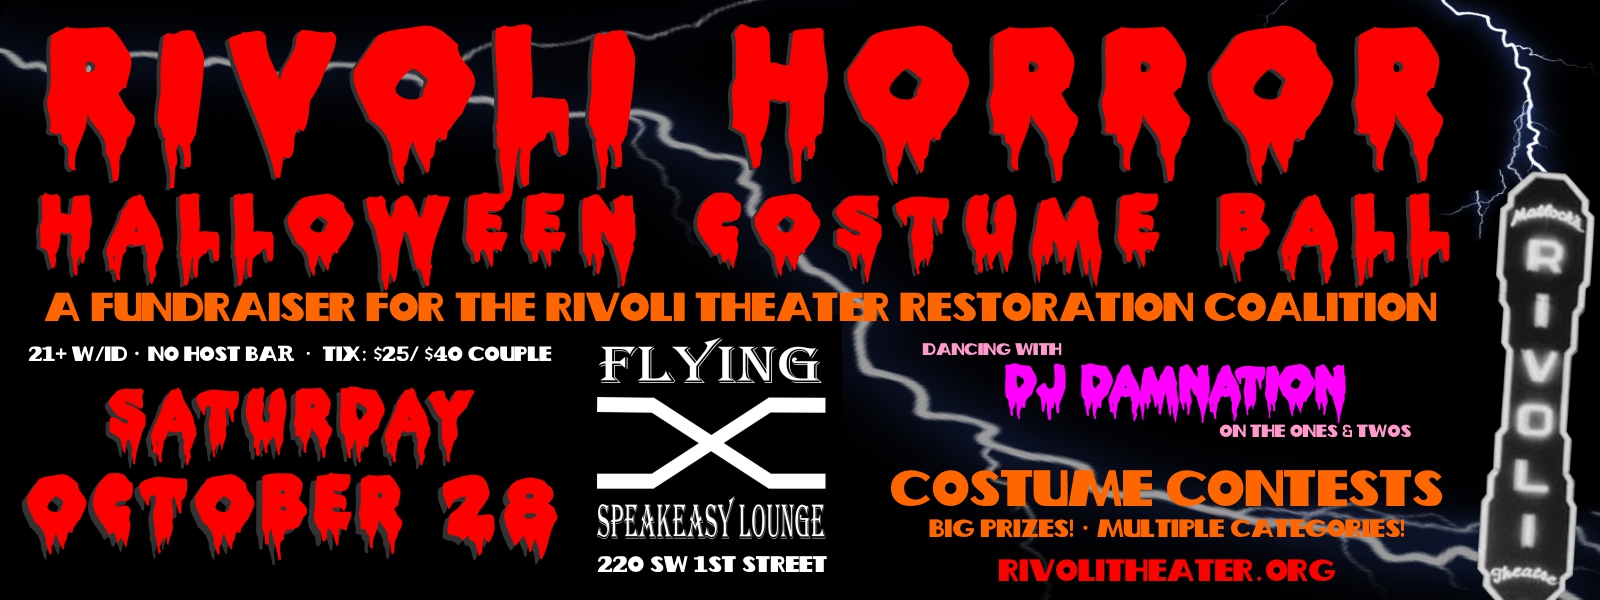 Rivoli Horror Halloween Costume Ball A Fundraiser for the Rivoli Theater Restoration Coalition Saturday, October 28 Dancing with DJ Damnation on the Ones and Twos Flying X Speakeasy Lounge 21+ w/ ID, no host bar, tix: $25/$40 couple Costume Contests: Big prizes! Multiple Categories!